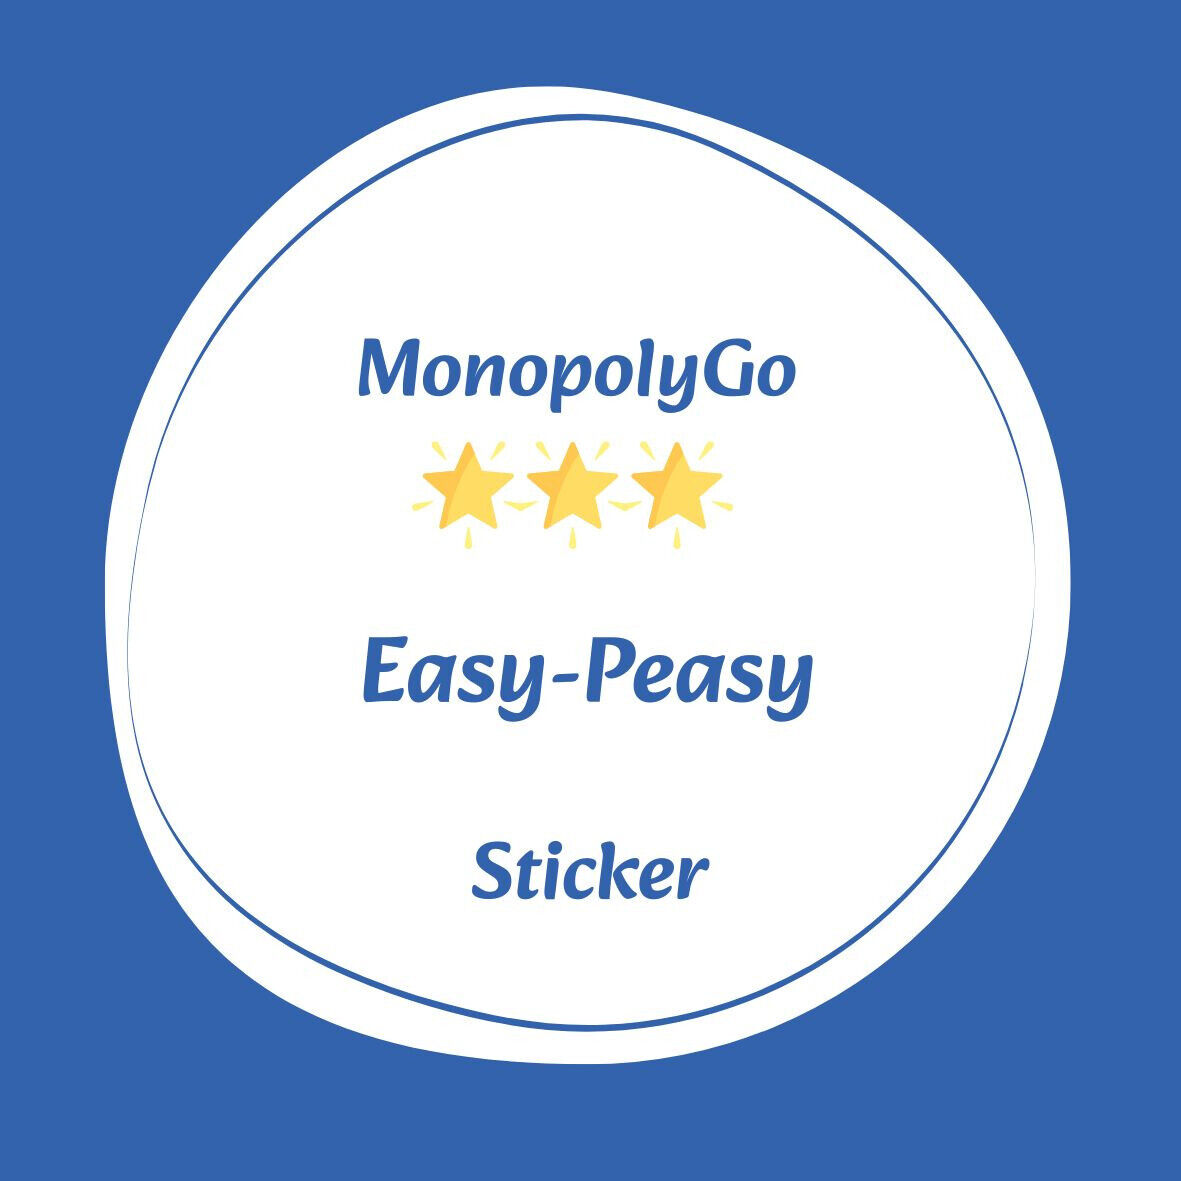 Easy-Peasy Monopoly Go 3 Stars ⭐️⭐️⭐️ Sticker Collection - Fast Delivery